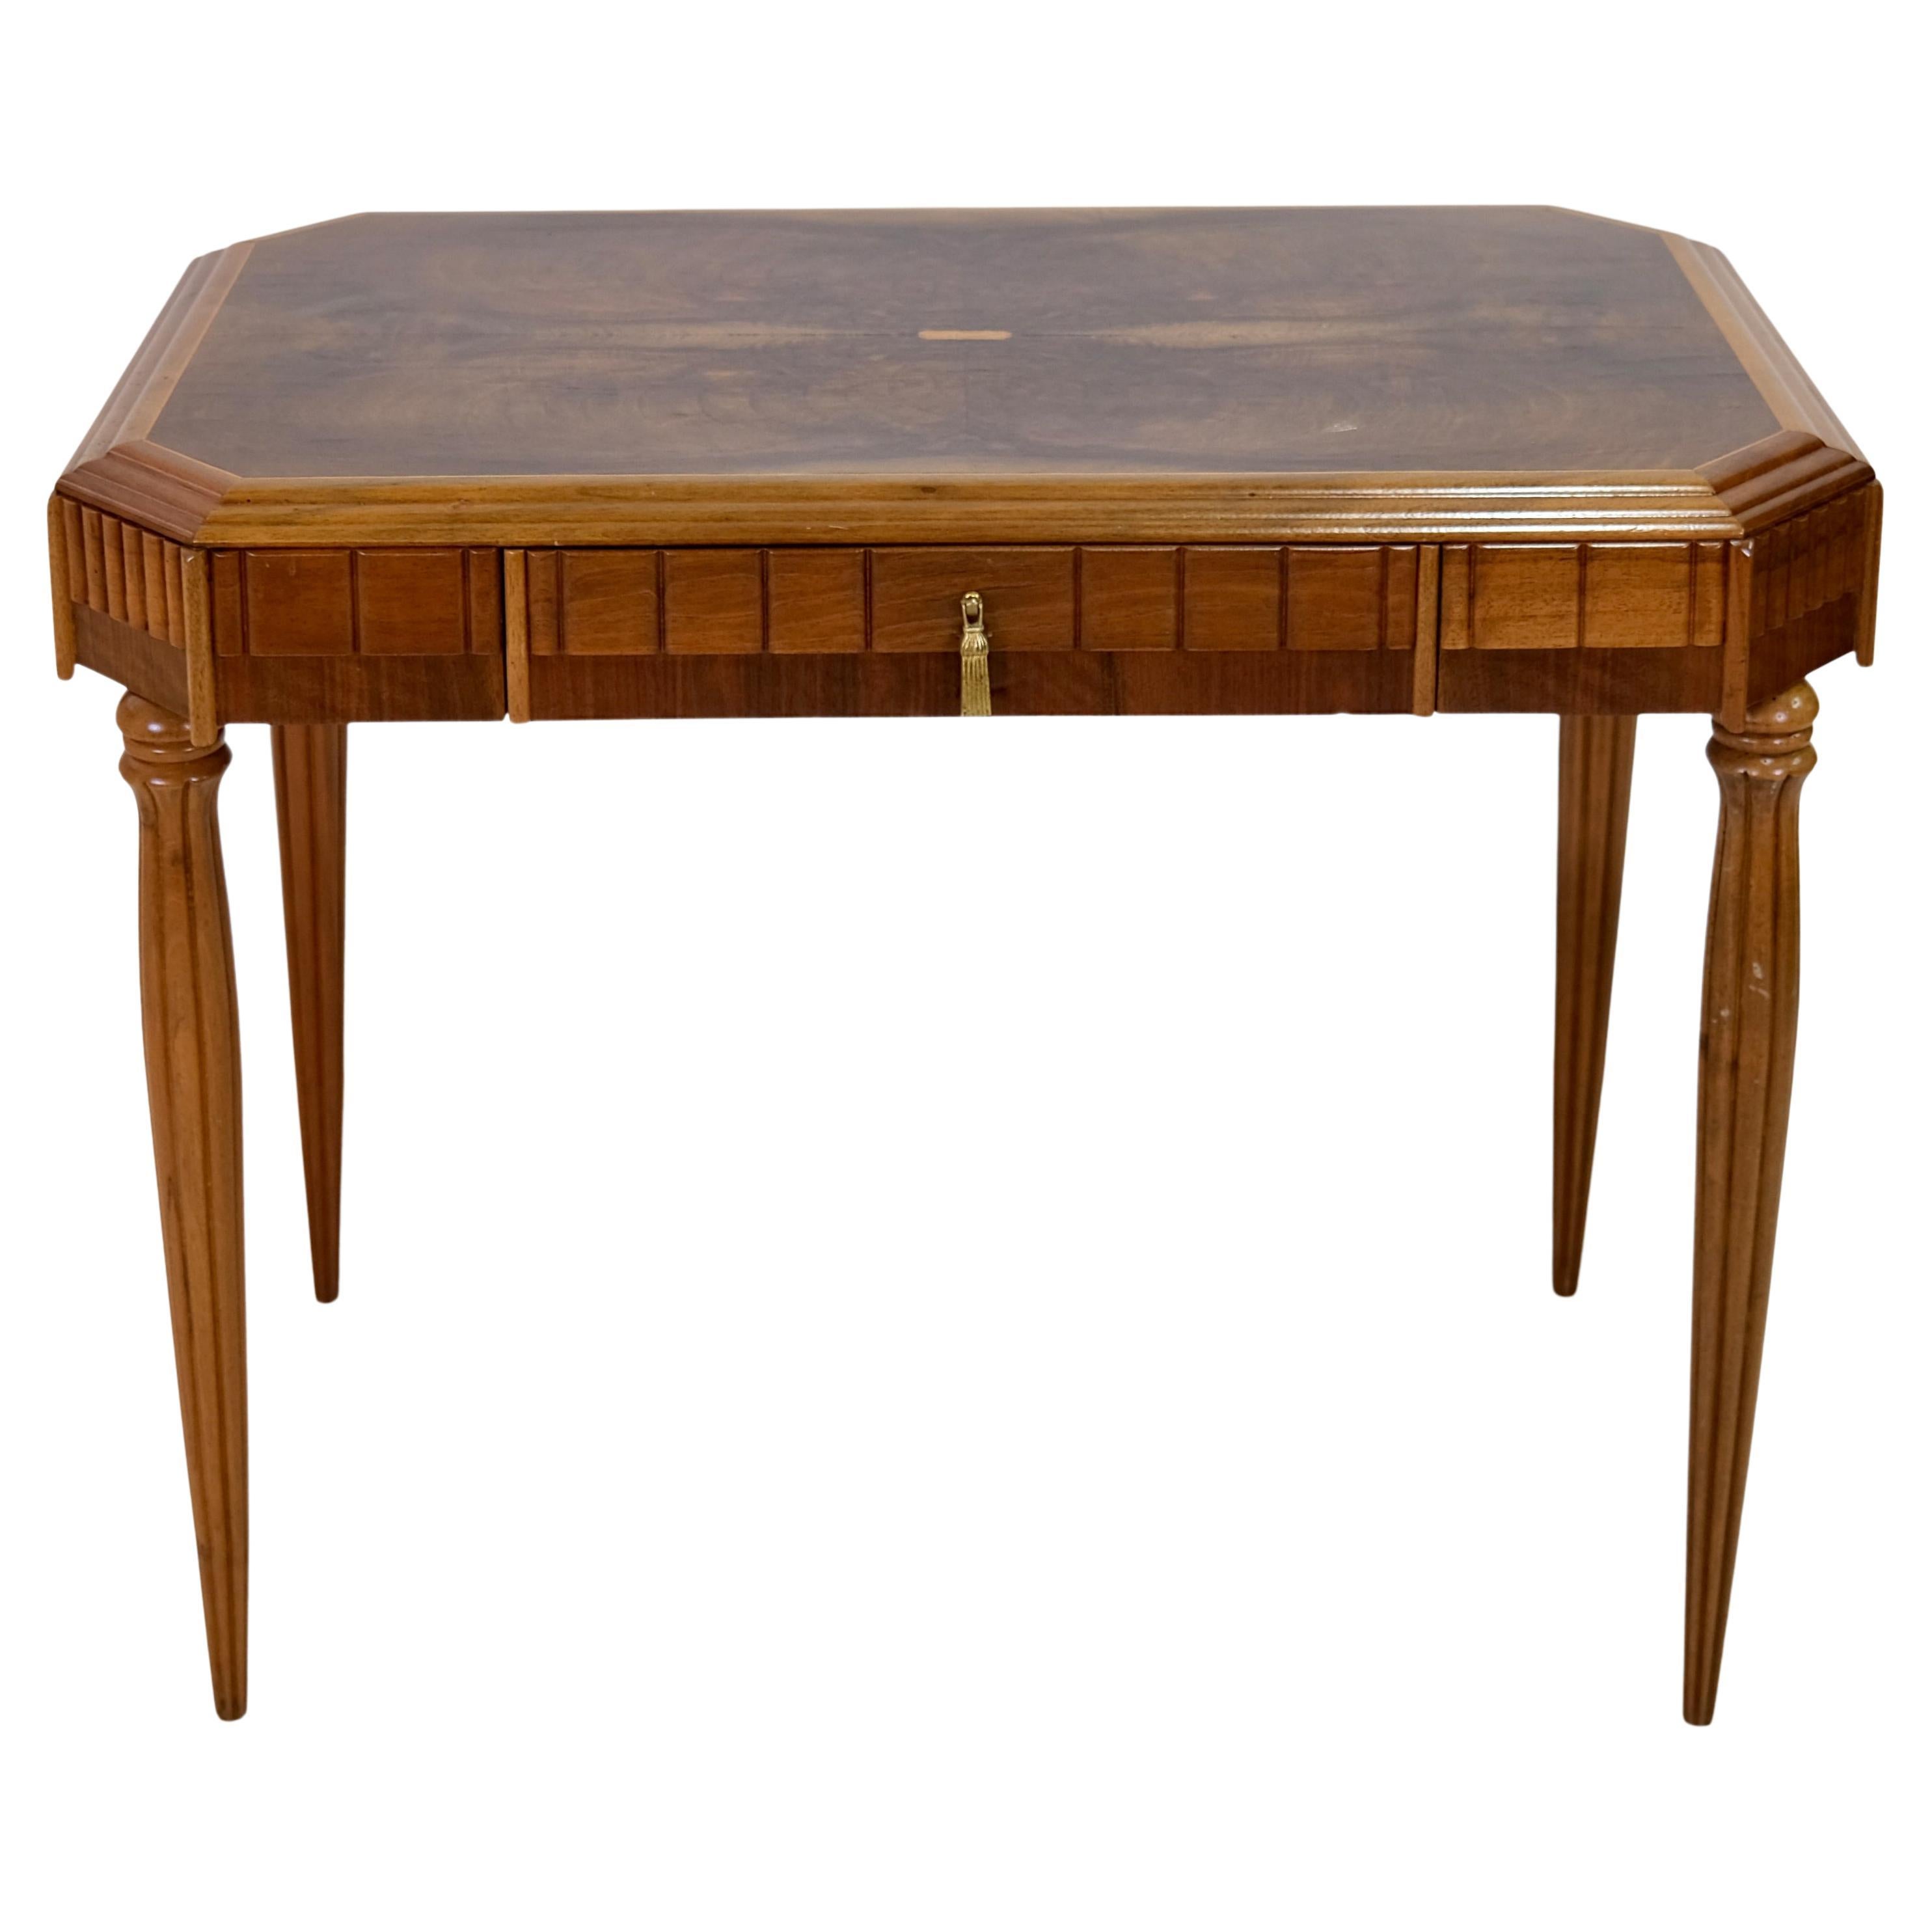 Early French Art Deco Desk in Nutwood, circa 1925 For Sale